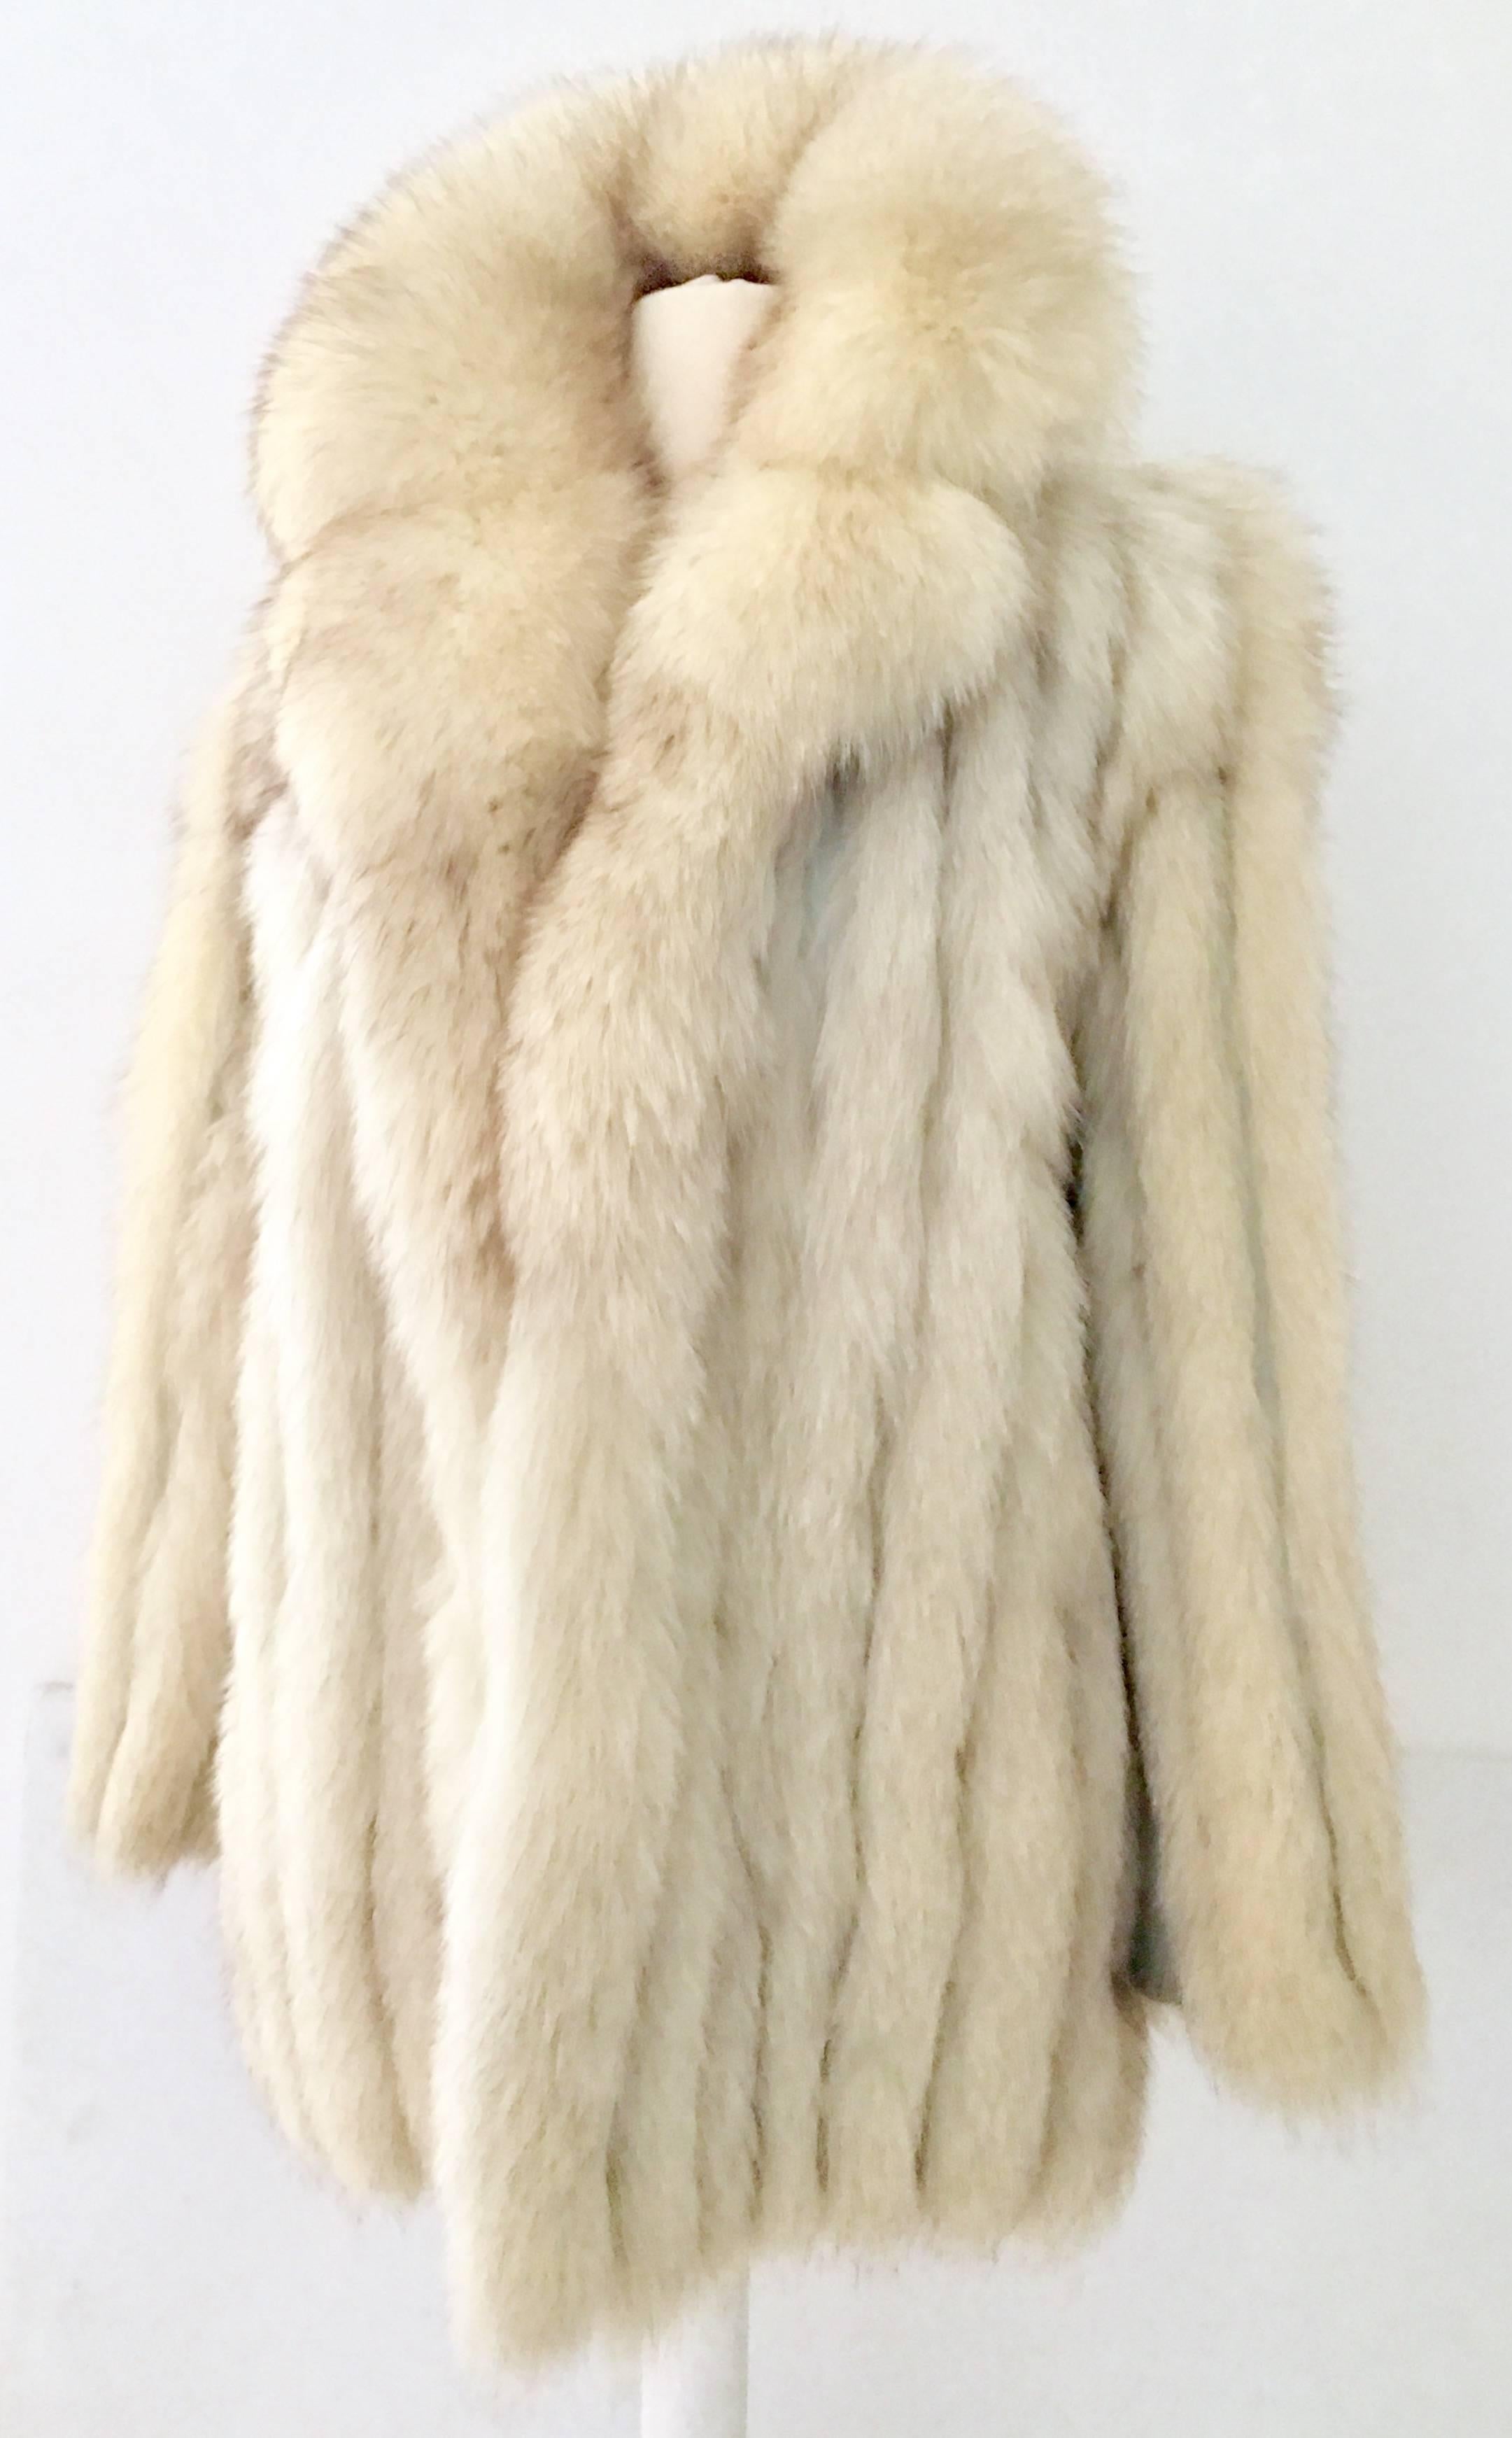 1970'S Silver Fox Fur Coat by, Nigbor Furs. This well preserved piece features grey leather panels and a winter white brown tip fox fur pelt design. It is fully lined with two side pockets and two invisible front closures. Size not marked, fits like